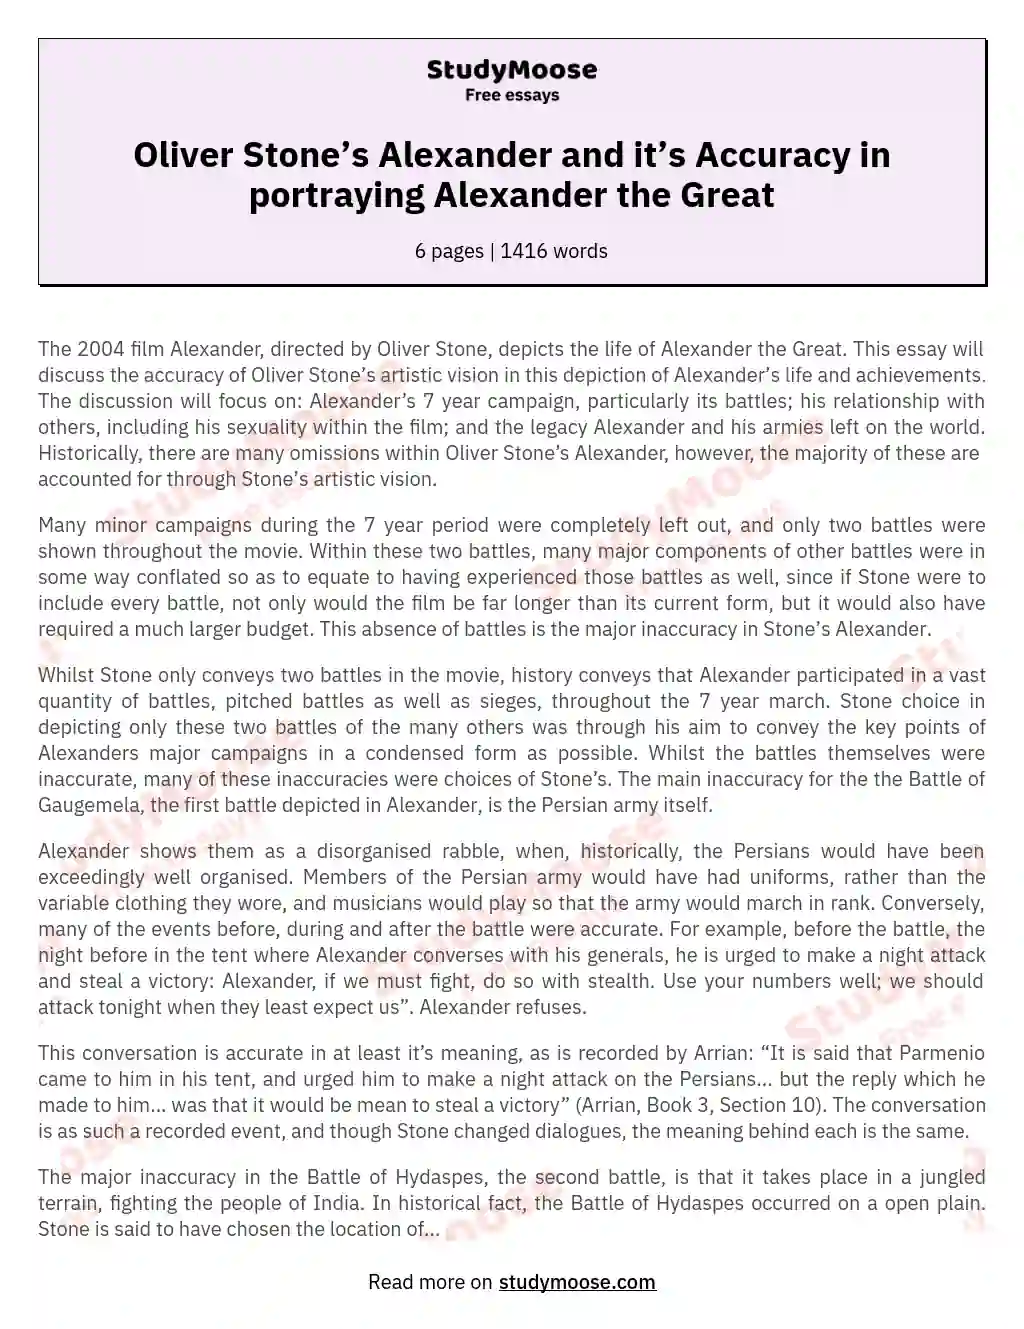 Oliver Stone’s Alexander and it’s Accuracy in portraying Alexander the Great